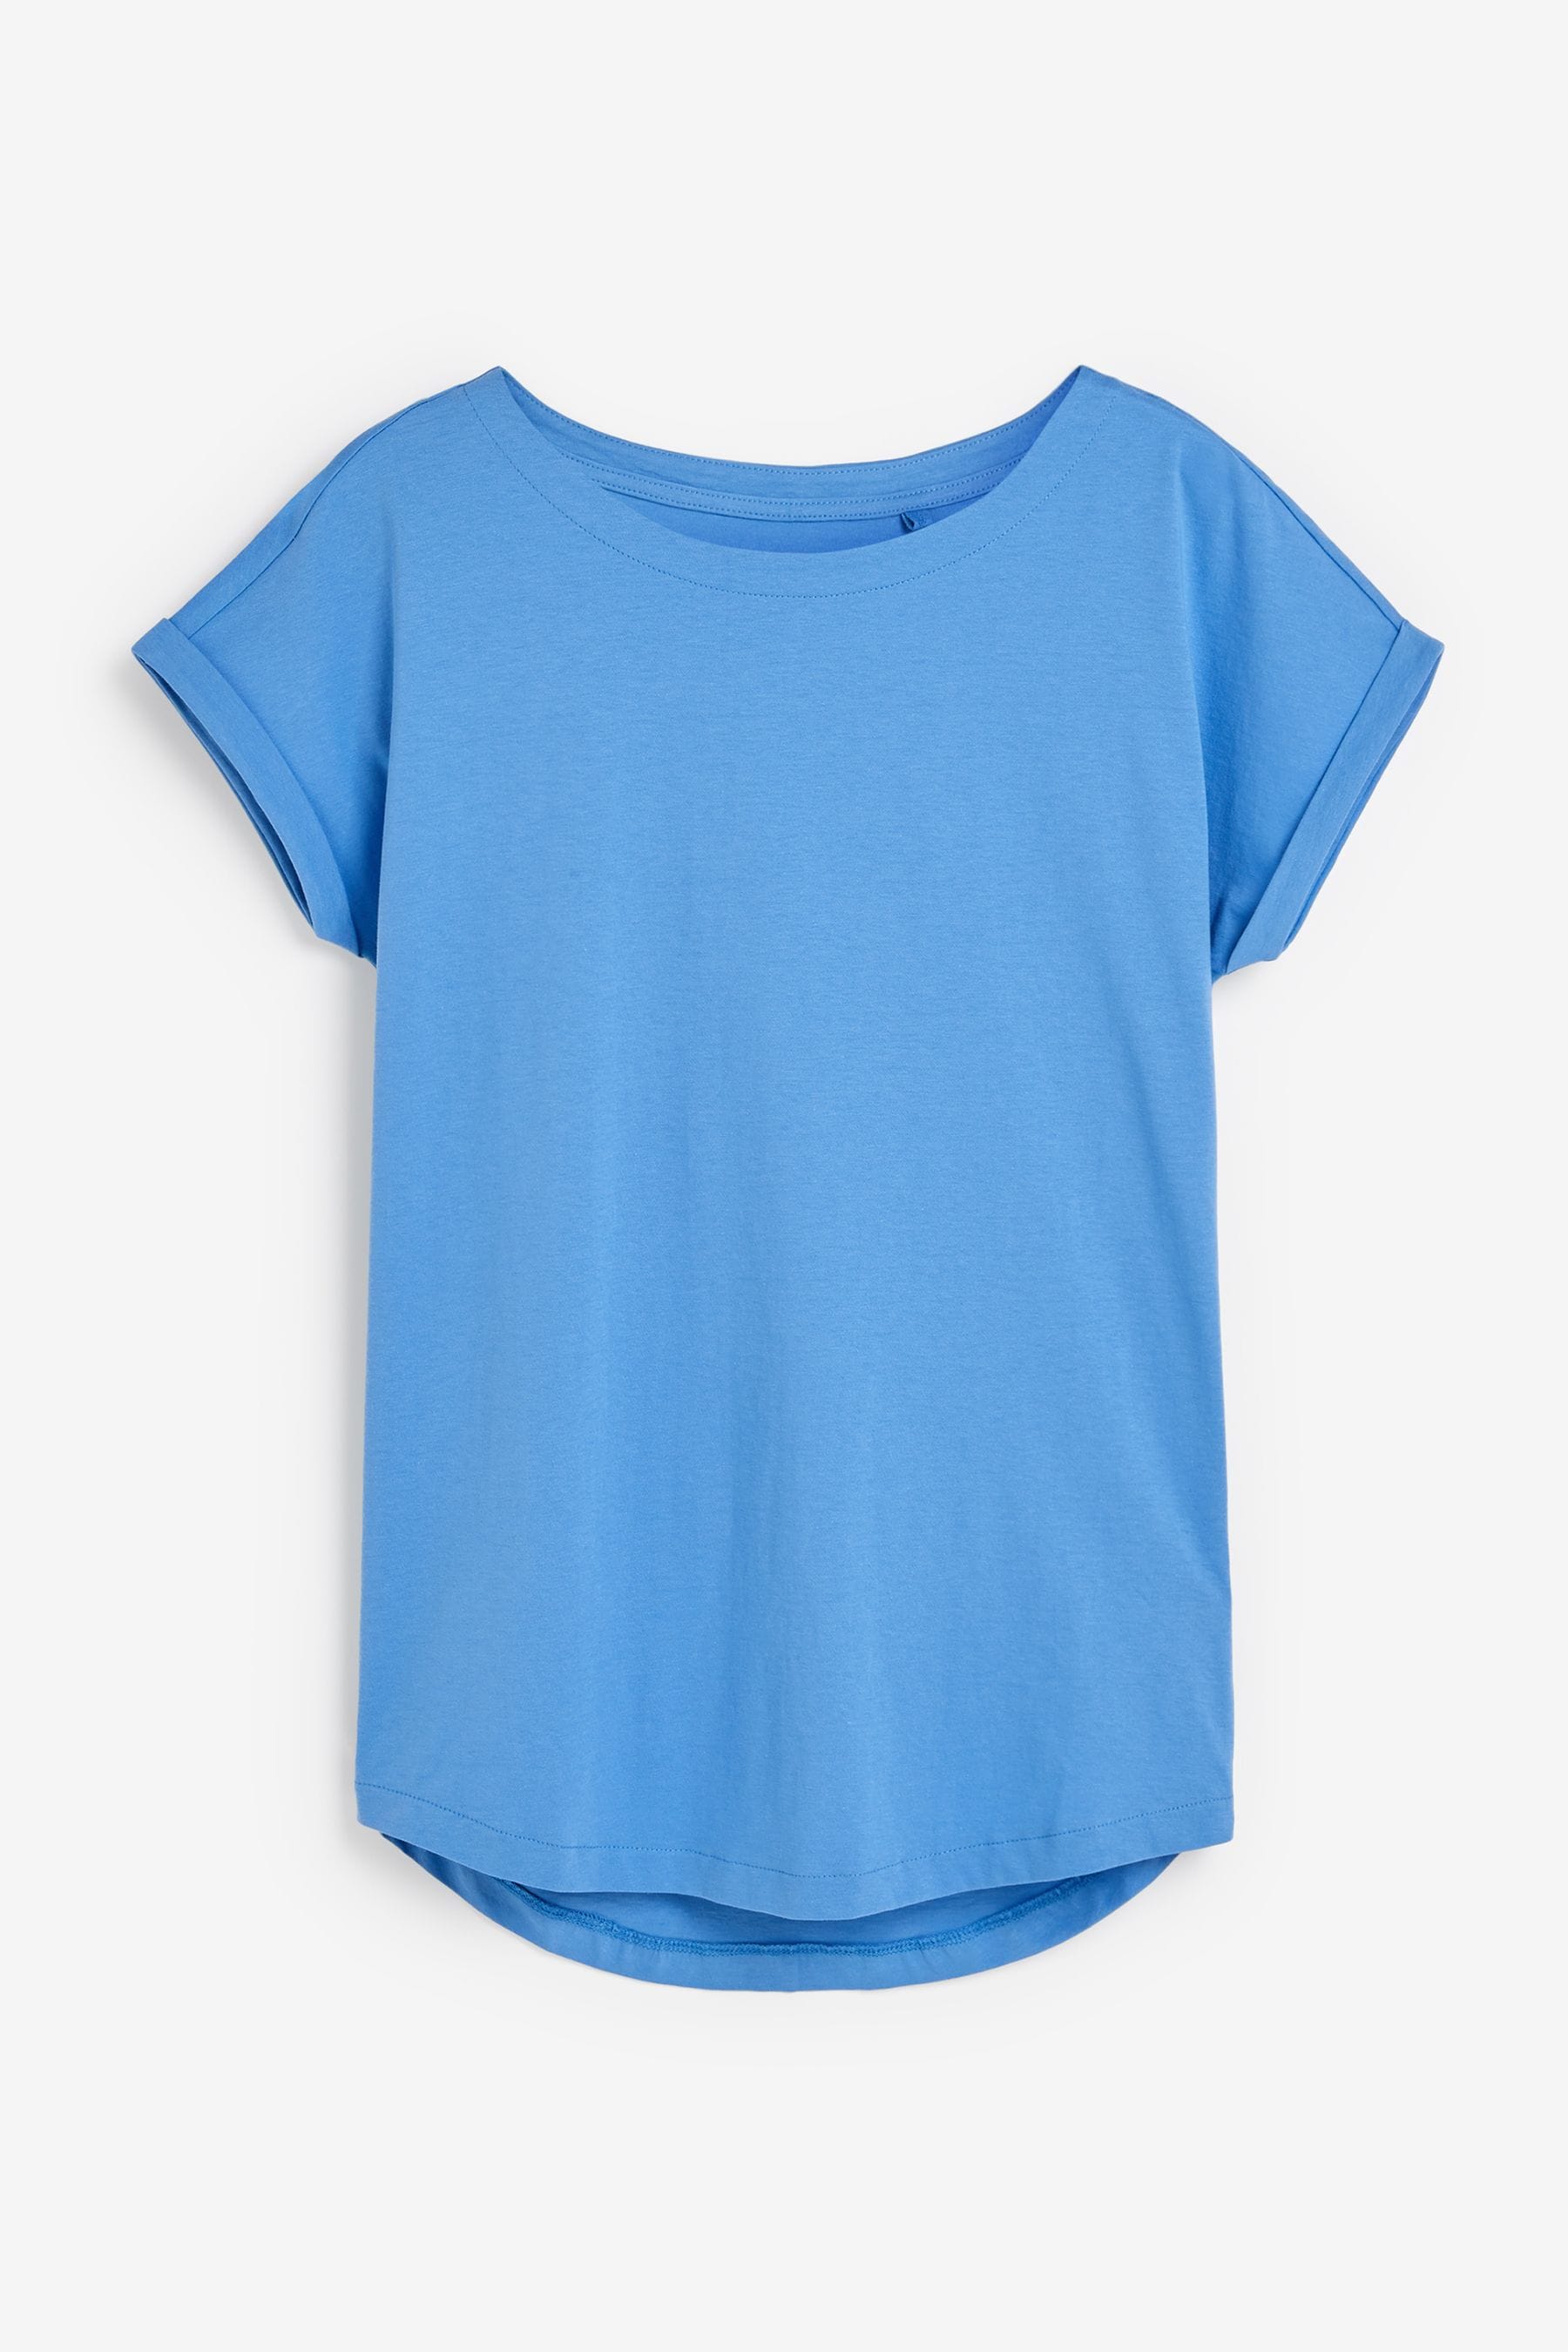 Buy Pale Blue Round Neck Cap Sleeve T-Shirt from the Next UK online shop